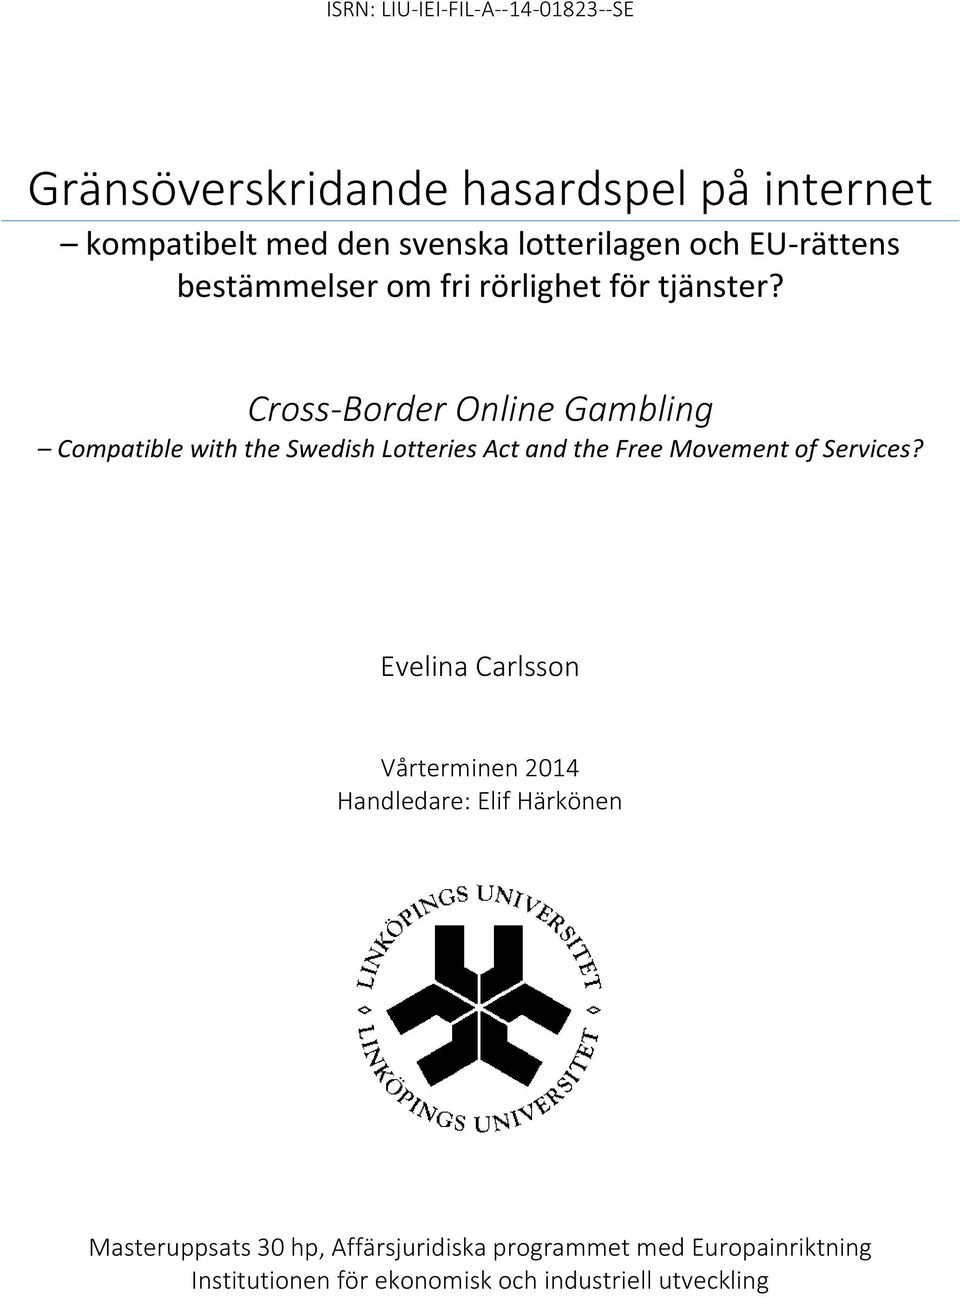 Cross-Border Online Gambling Compatible with the Swedish Lotteries Act and the Free Movement of Services?